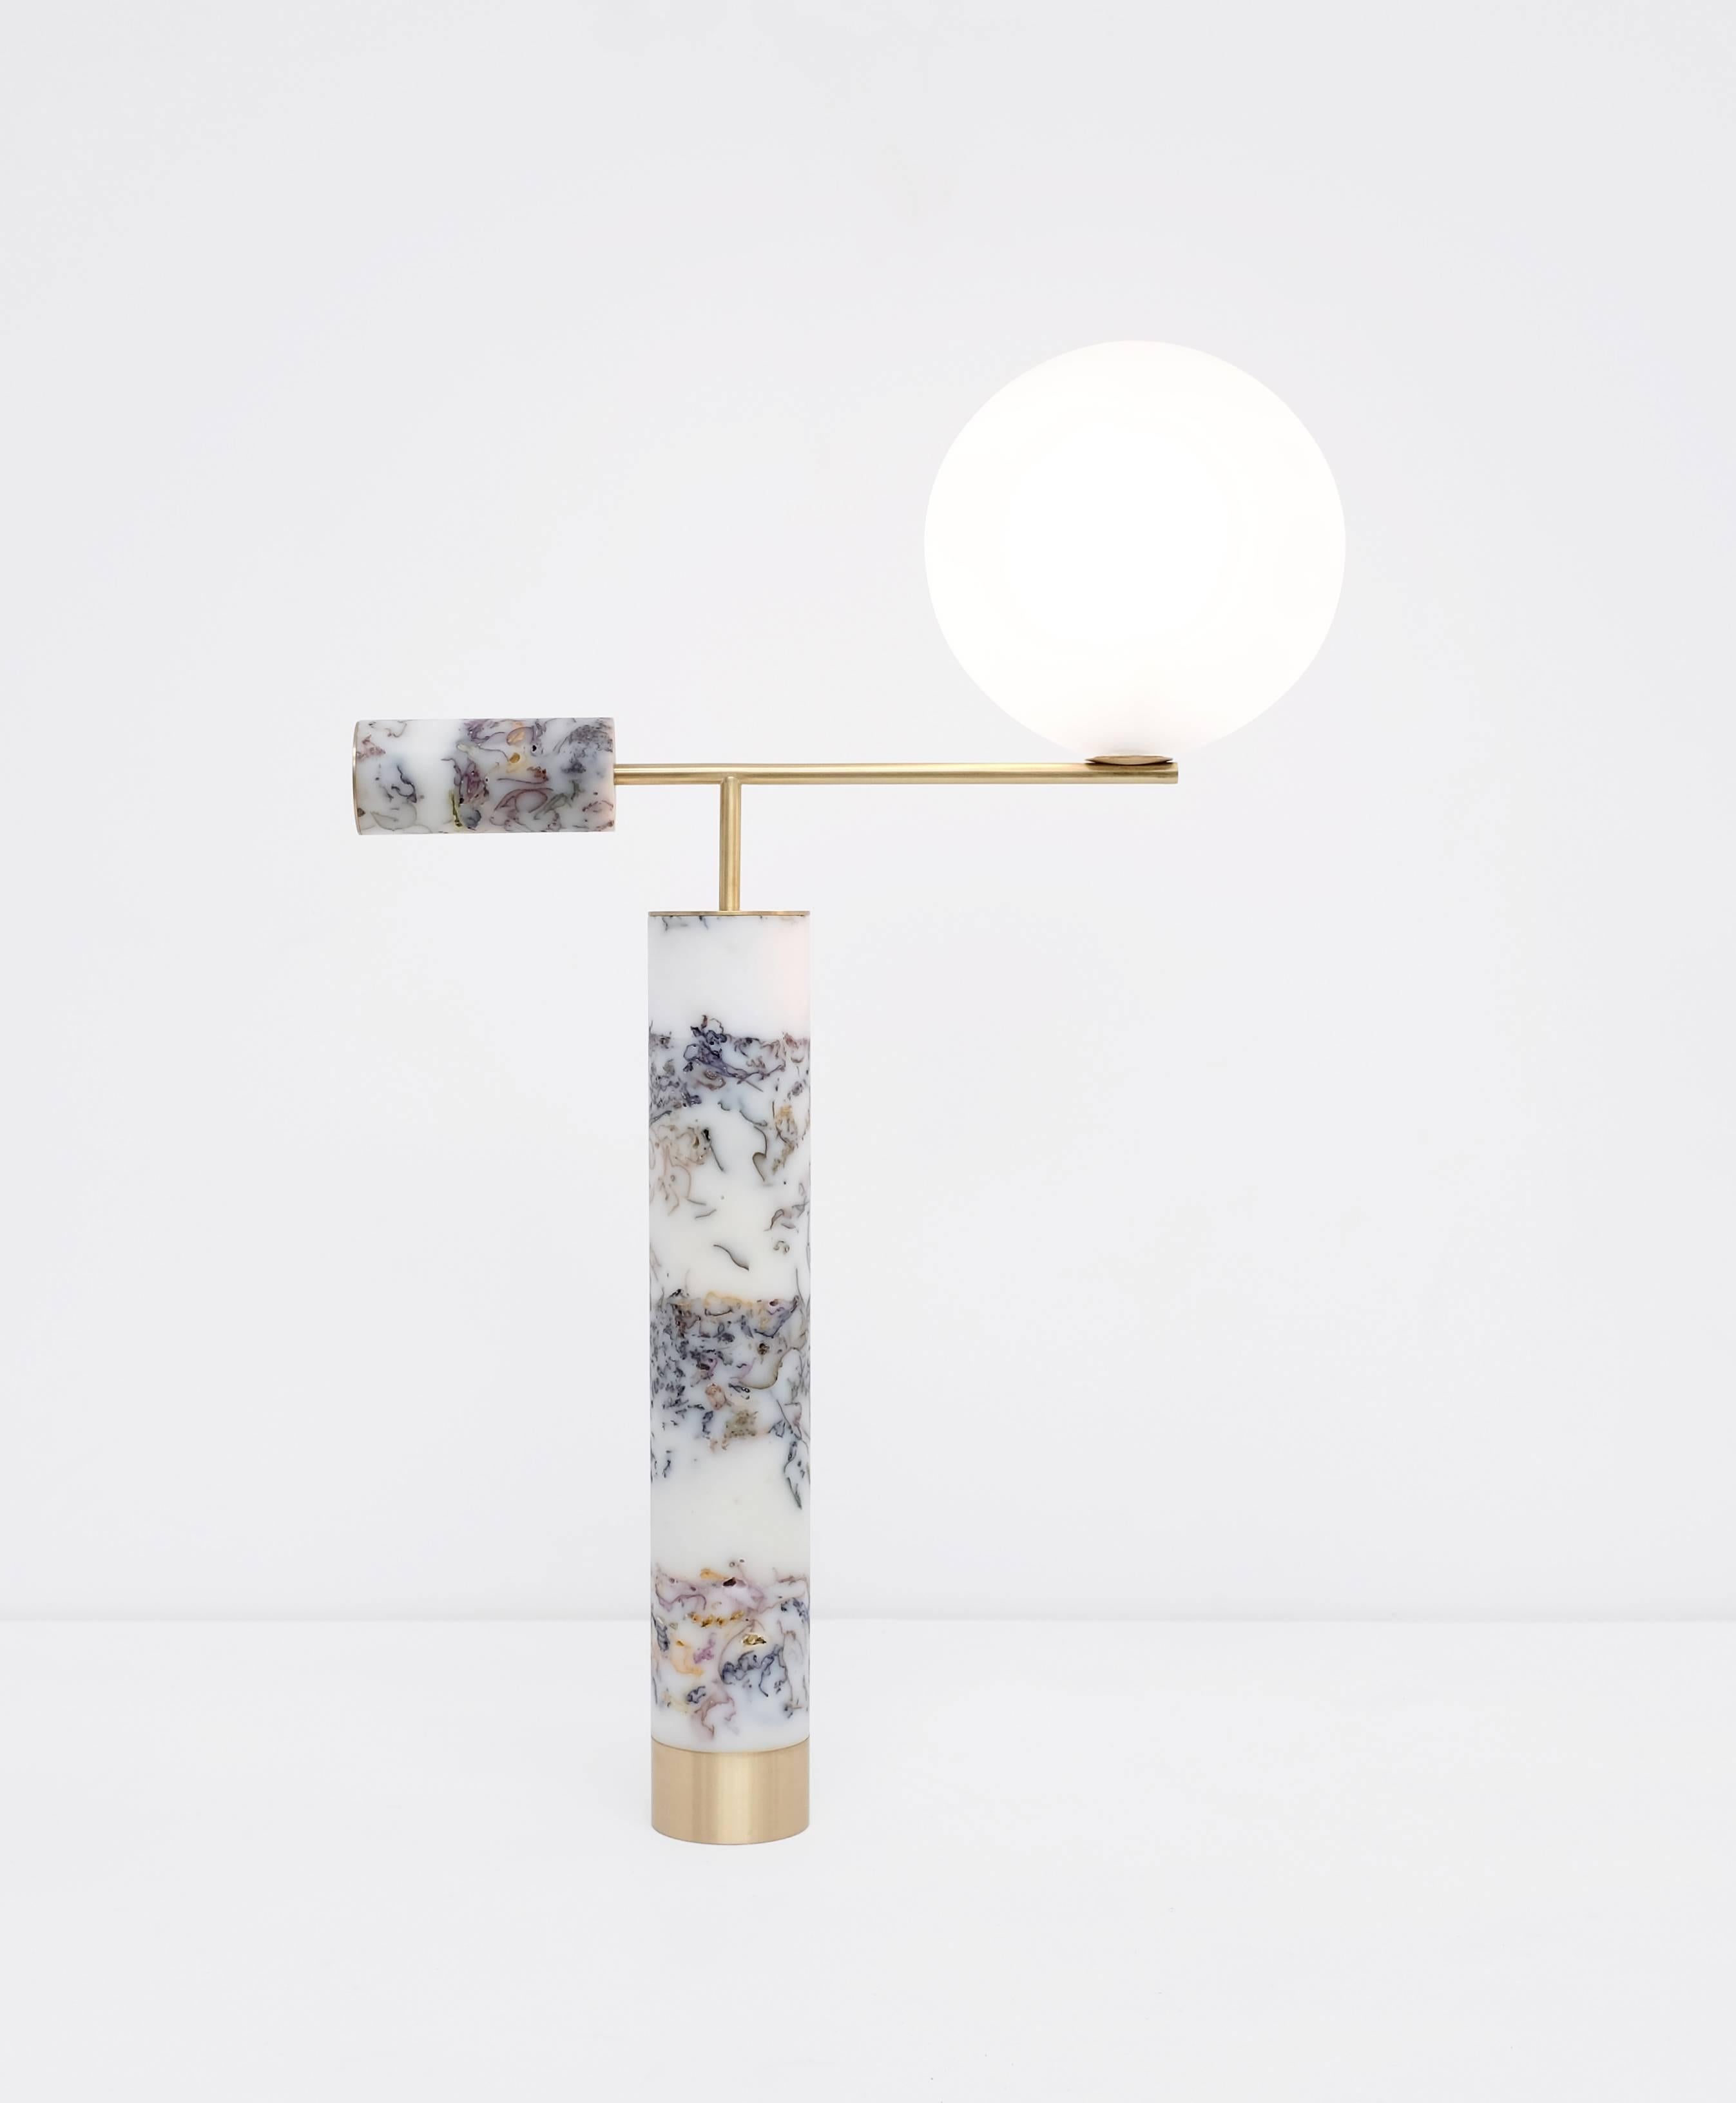 Table lamp, 2017.

Brass, flowers, resin, handblown glass.

White or black resin version available.

Unique piece.

Measure: H 23.6 x W 16.9 x D 7.